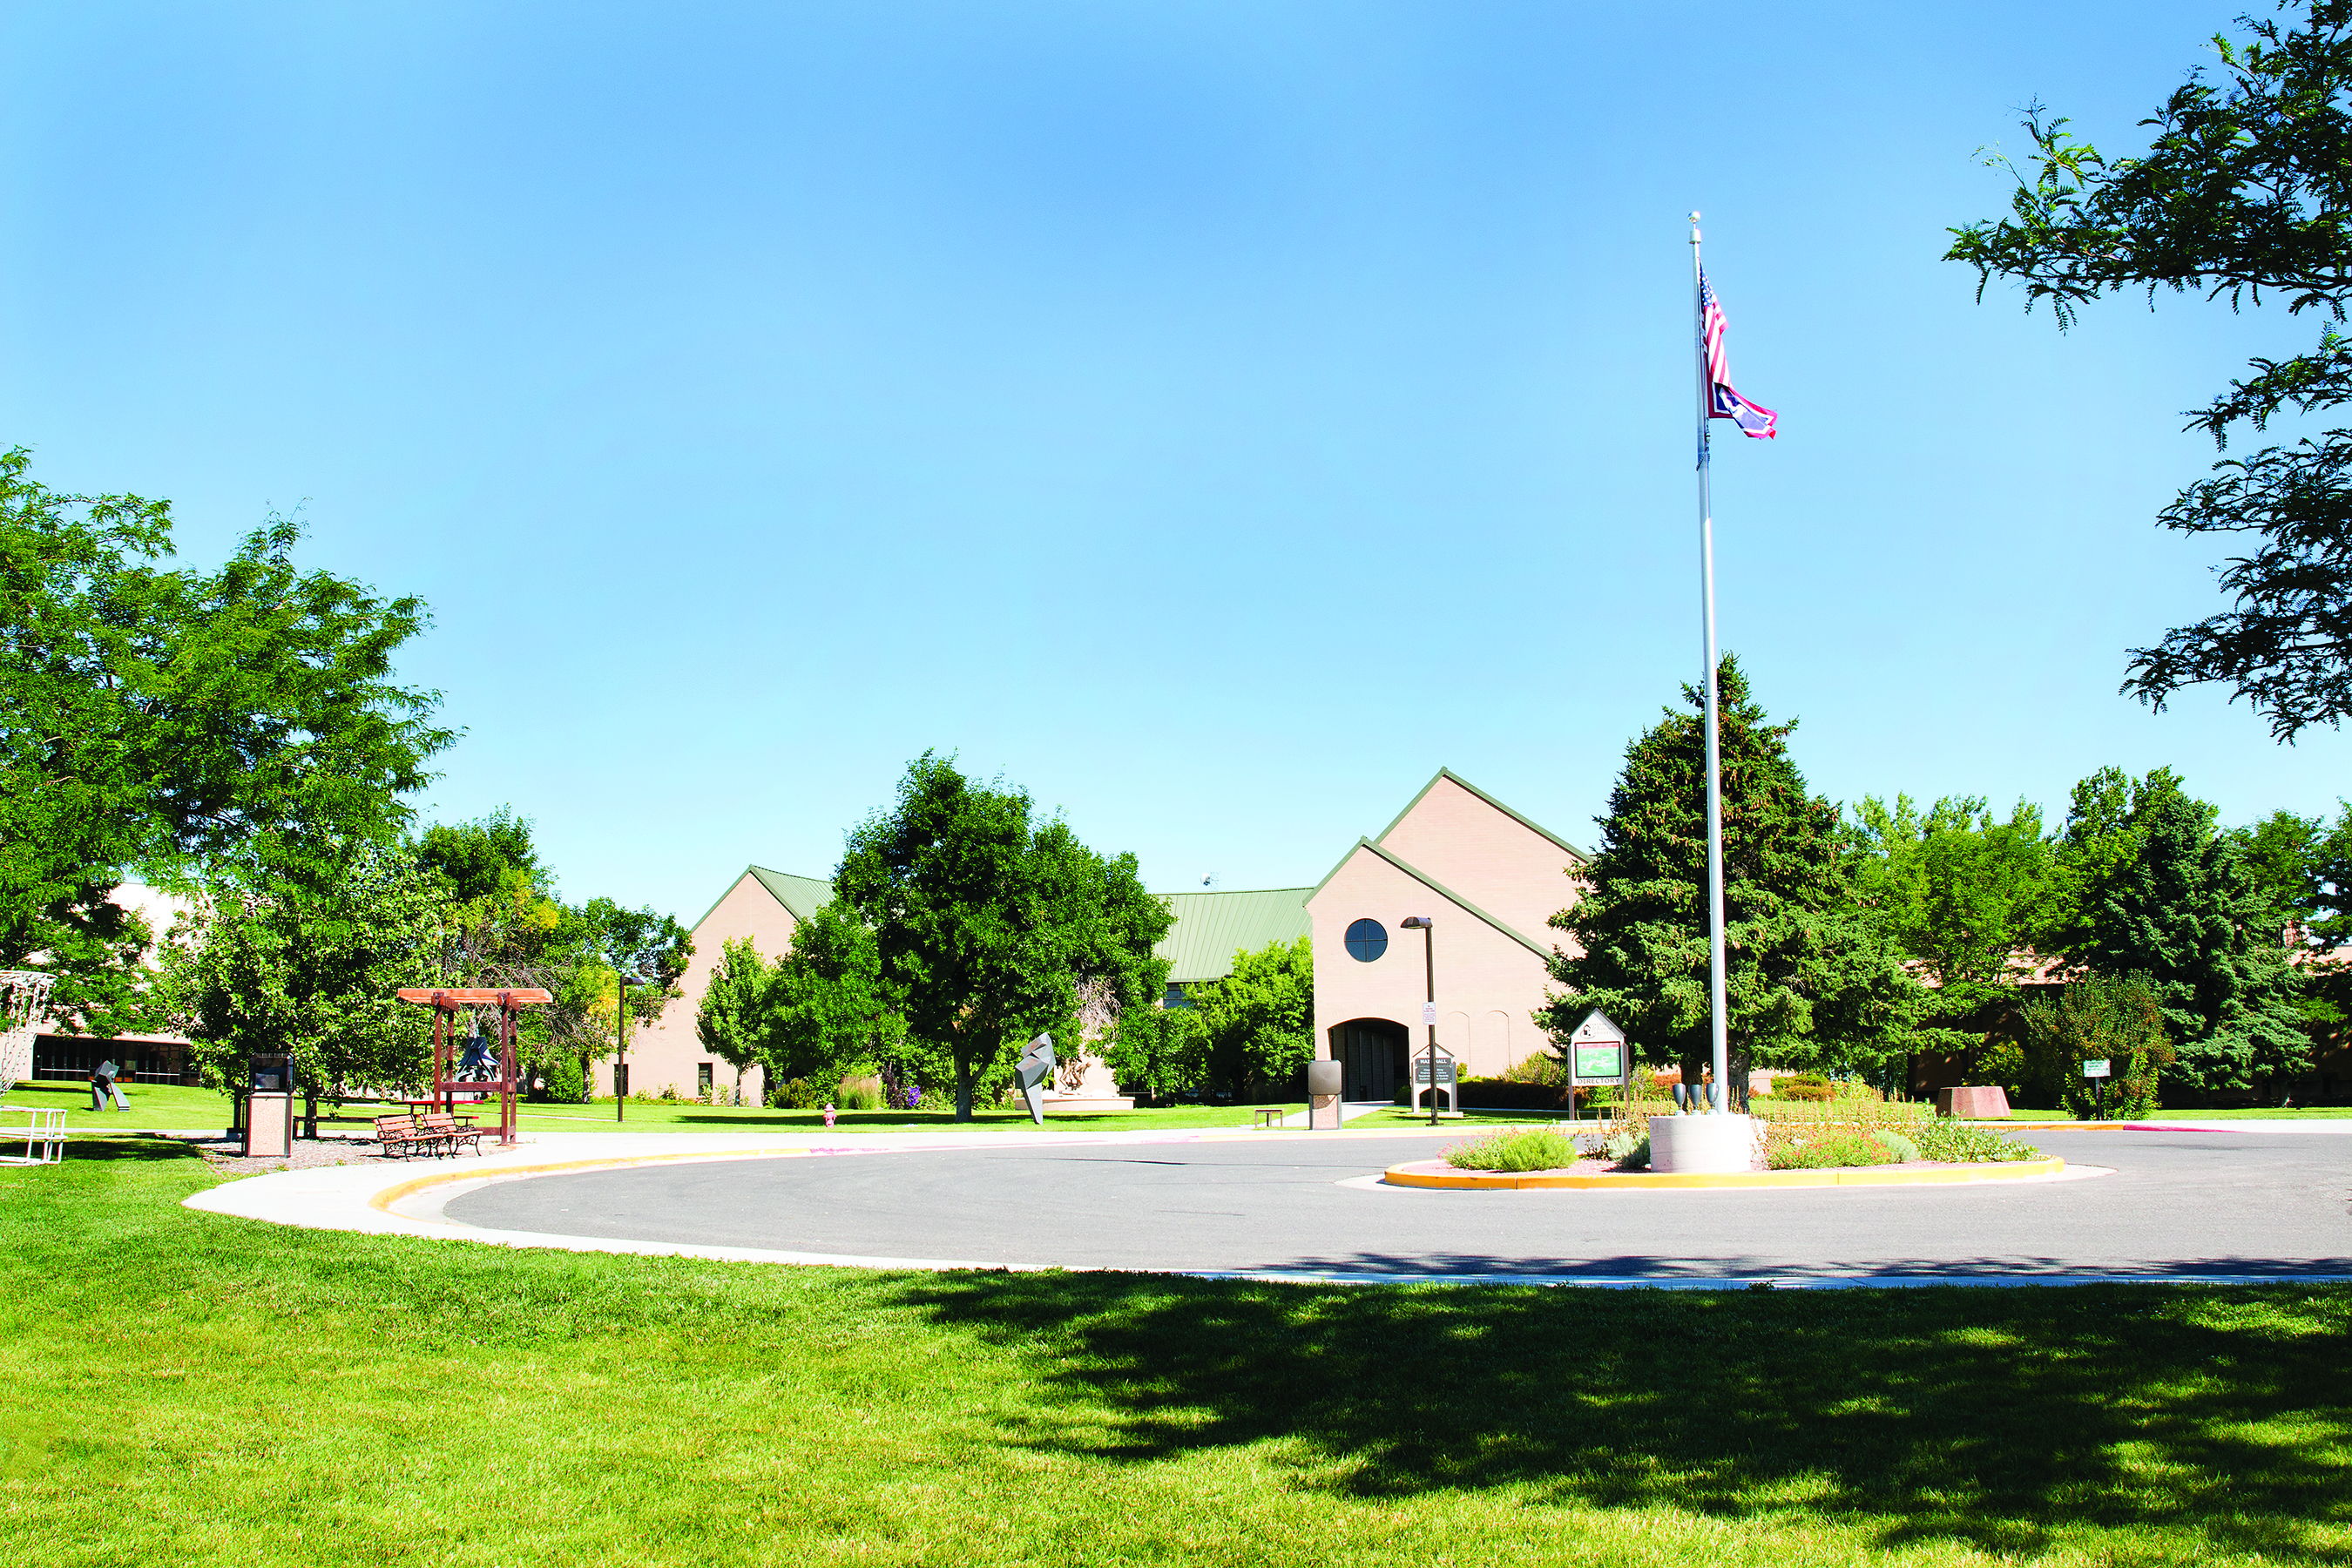 Main Building, flag pole, and trees at CWC